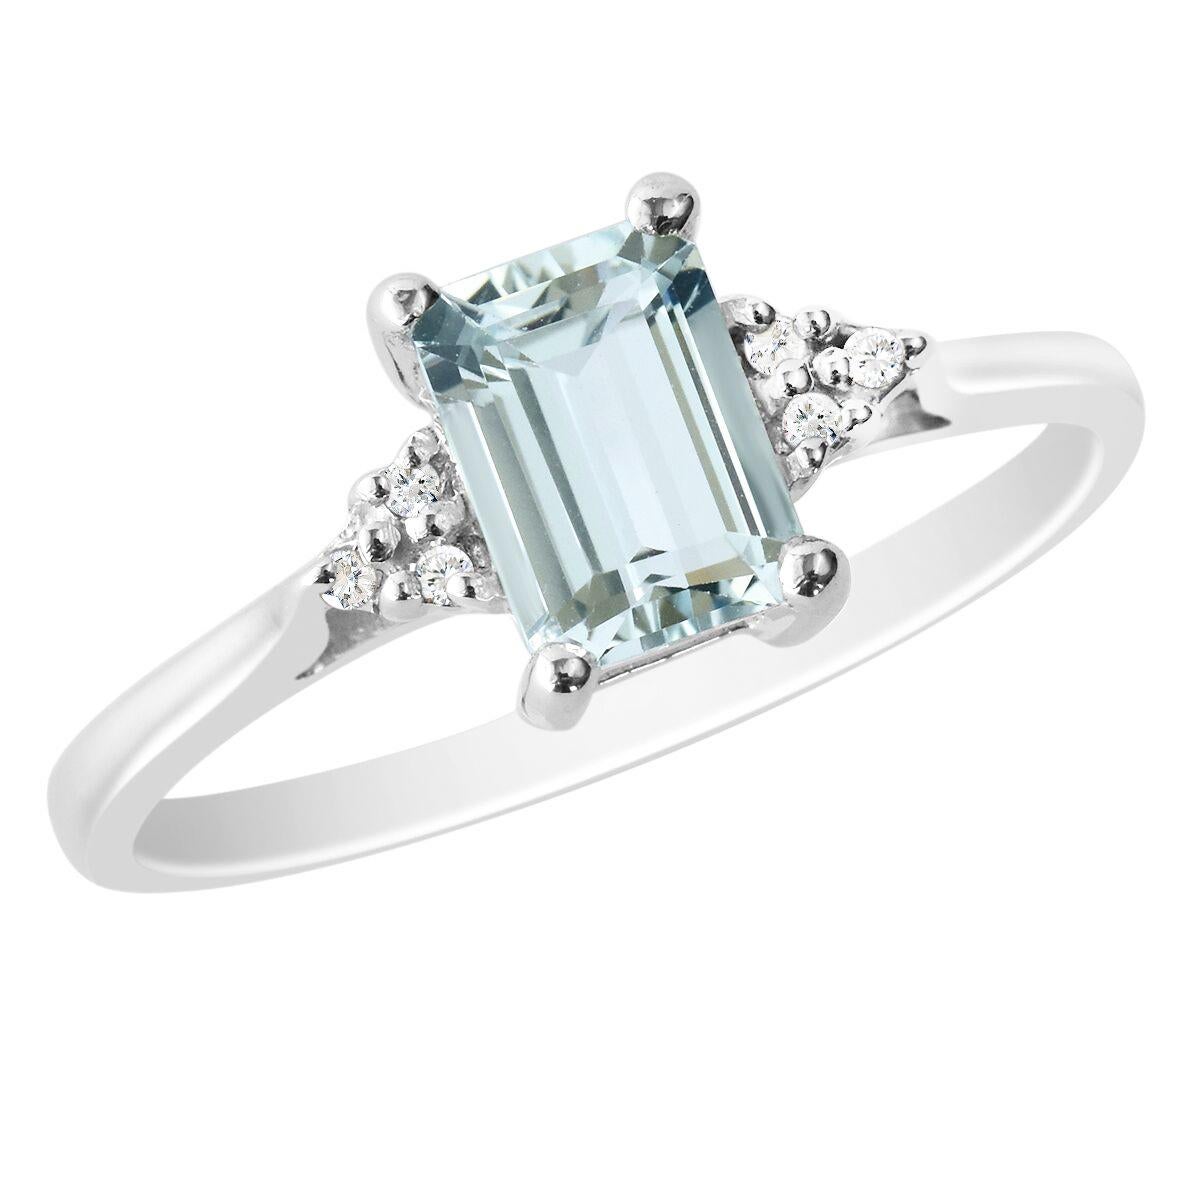 Contemporary 0.90 Carat Natural Emerald Cut Aquamarine Ring Solid White Gold with 6 Diamonds